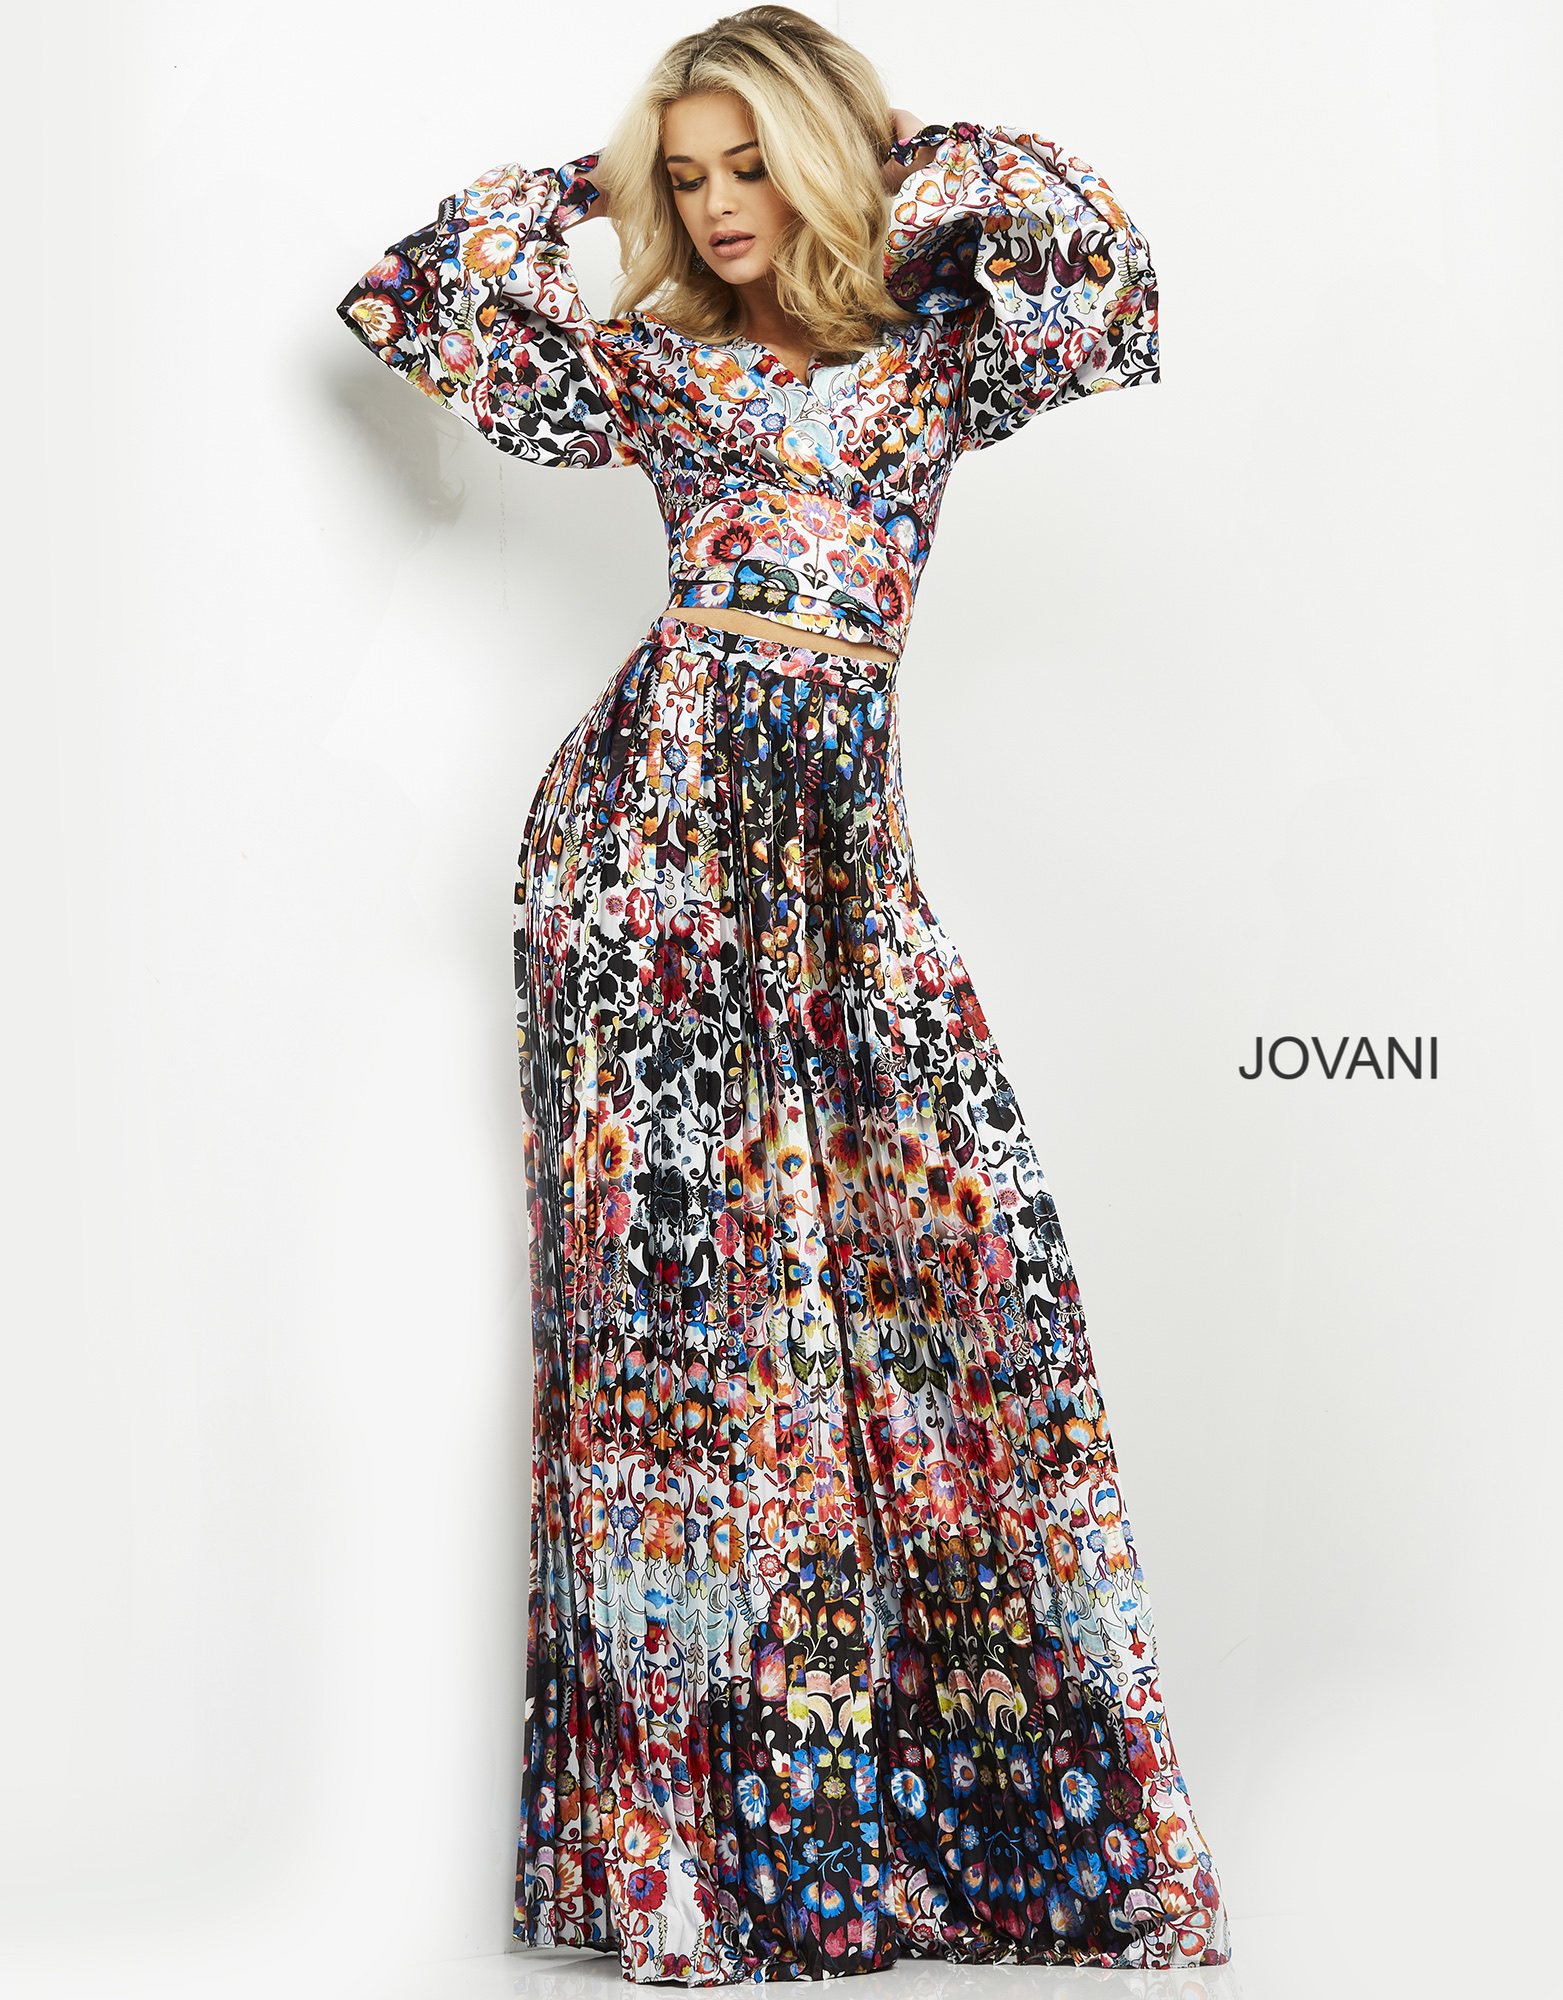 Jovani 06847 and 06848 Print Long Sleeve Two Piece Contemporary Set